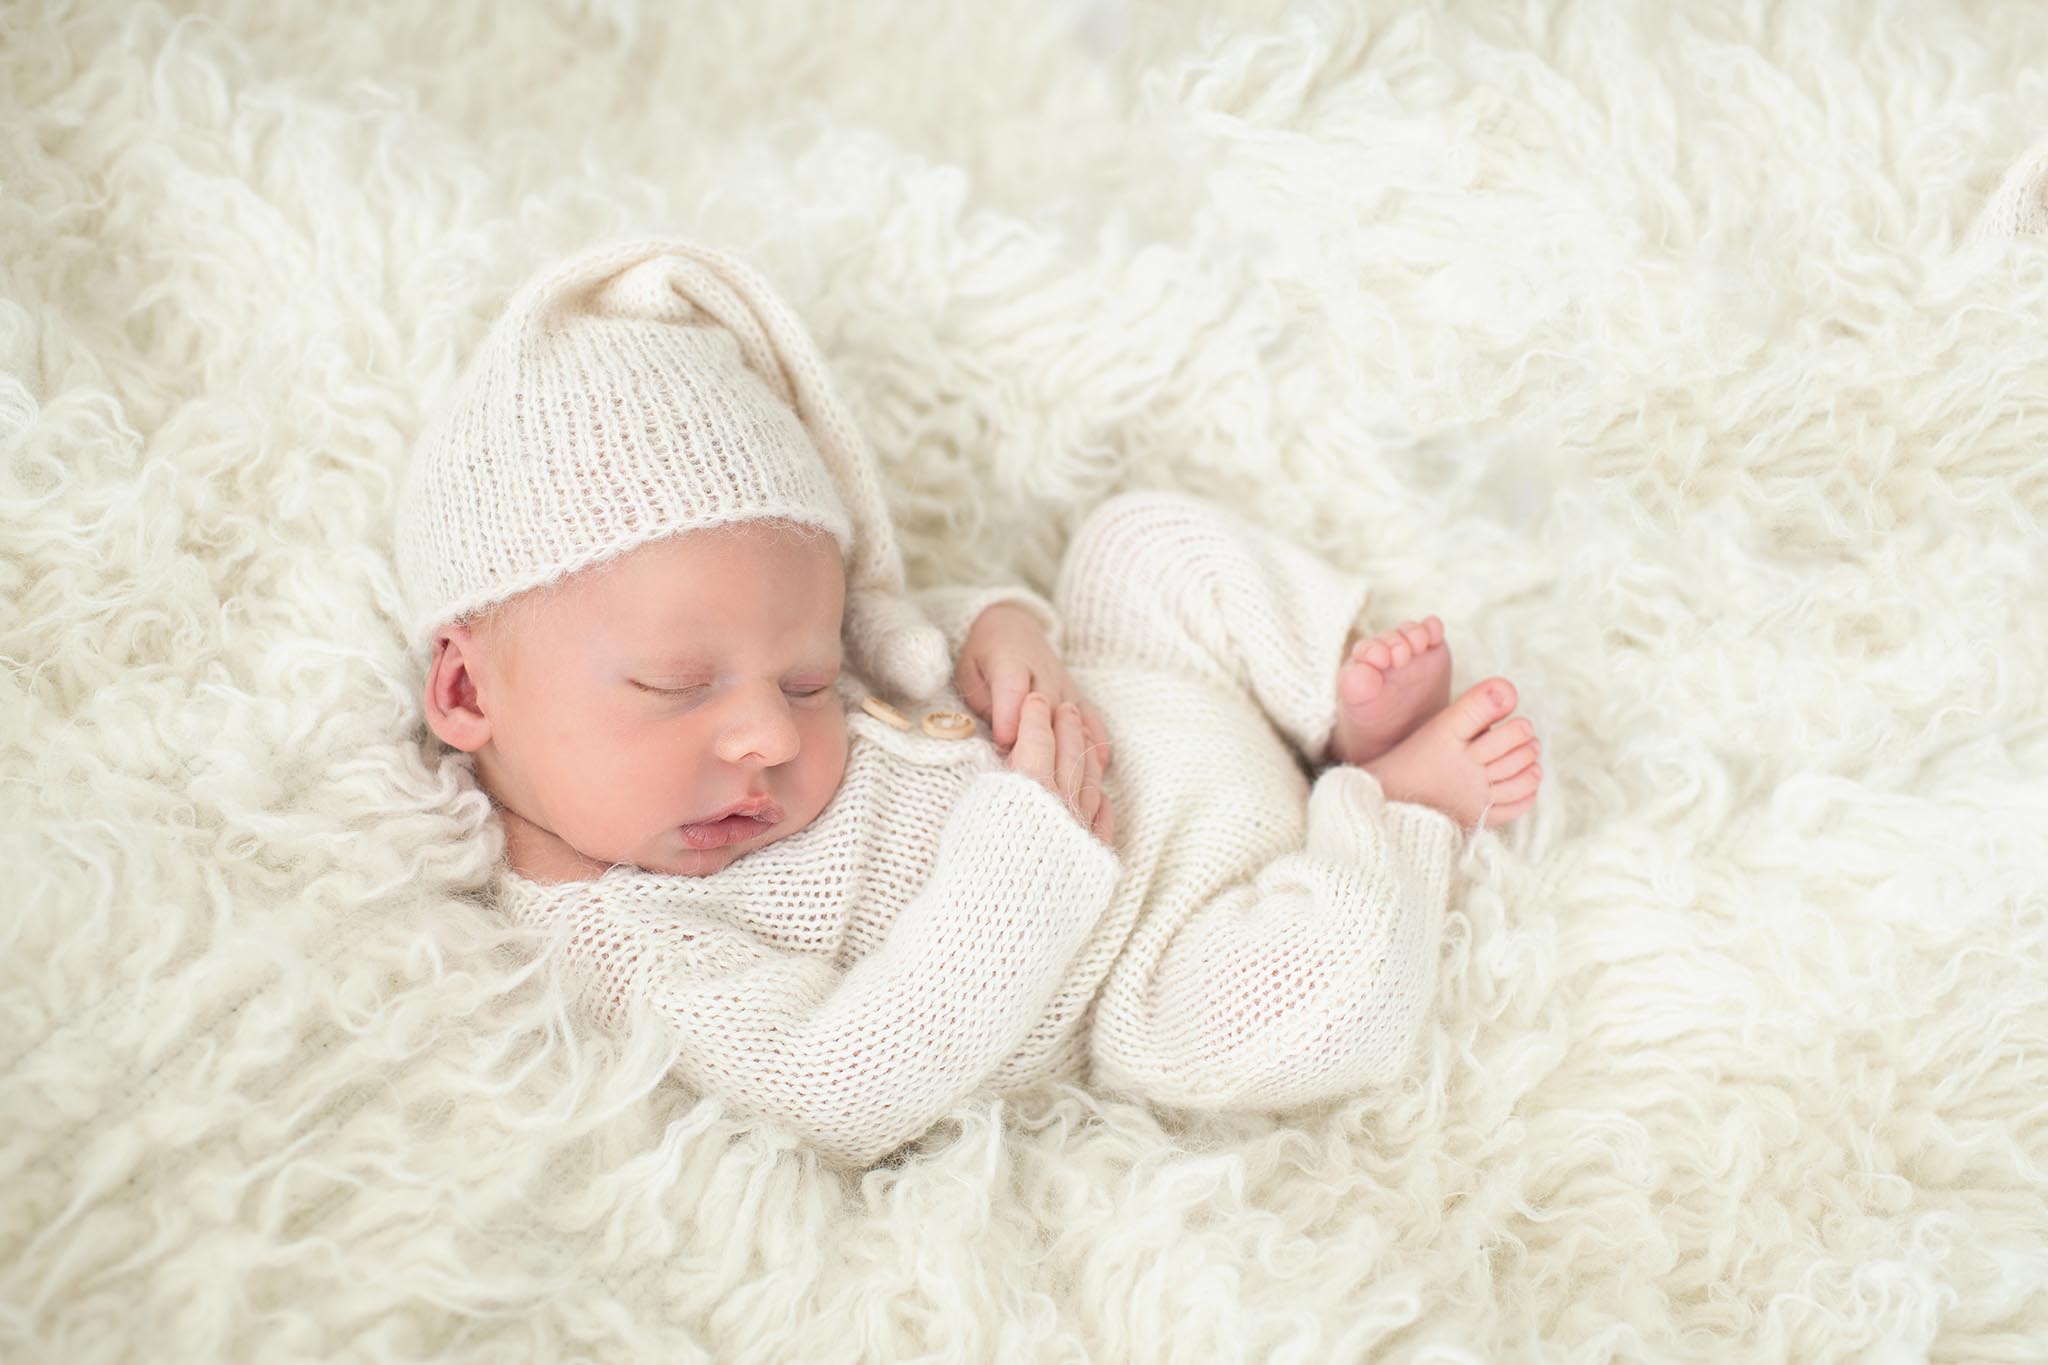 Sleeping newborn curled up with hat